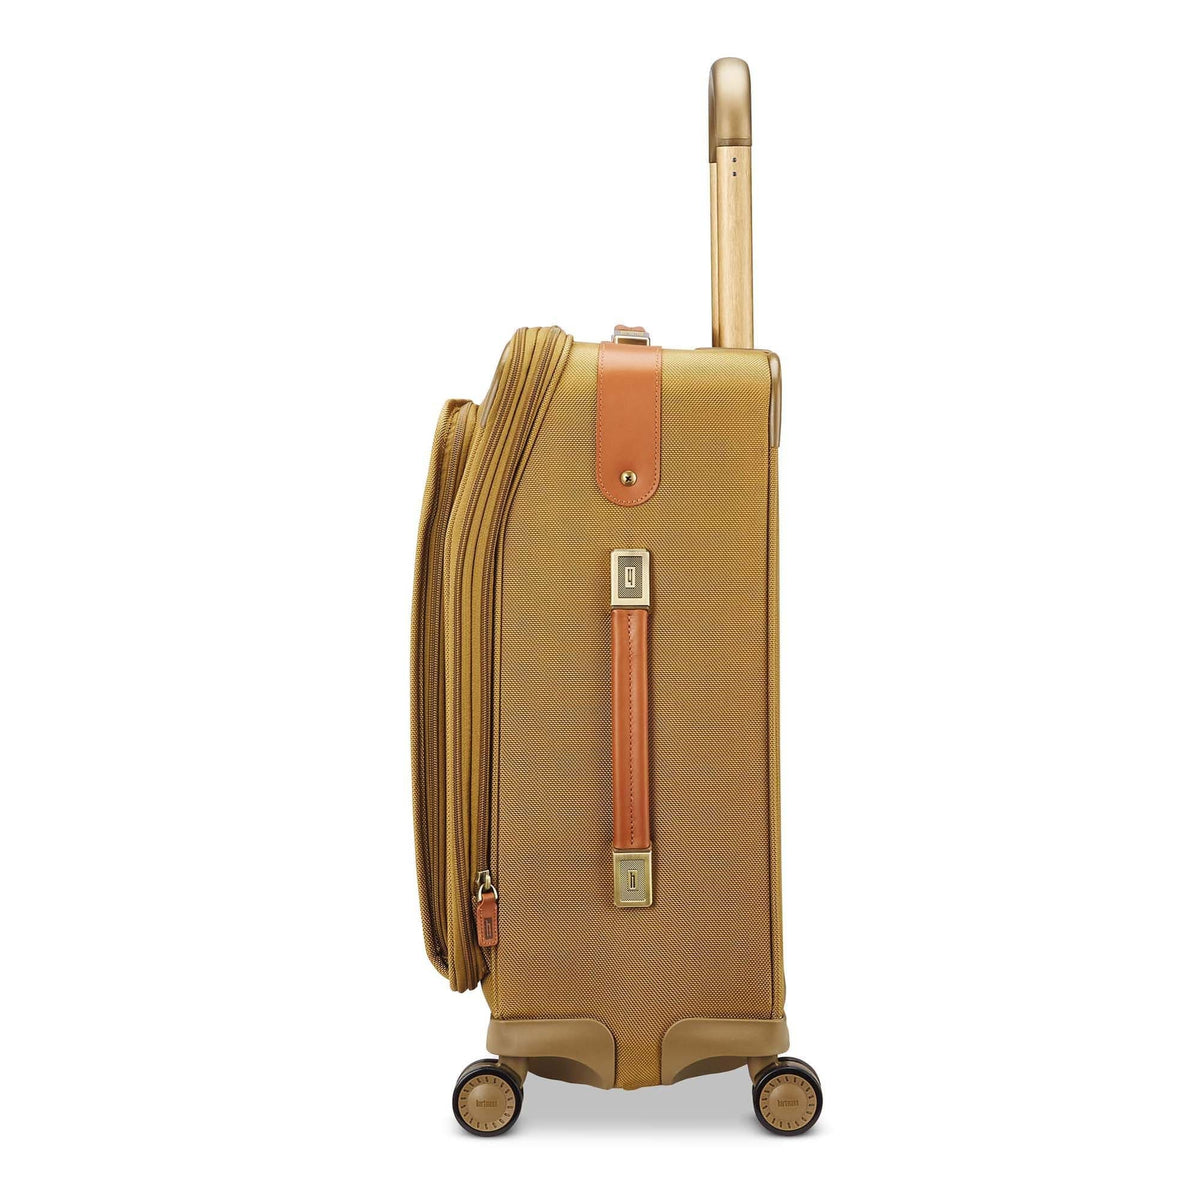 Hartmann Ratio Classic Deluxe 2 Softside Domestic Carry-On Expandable Spinner Luggage